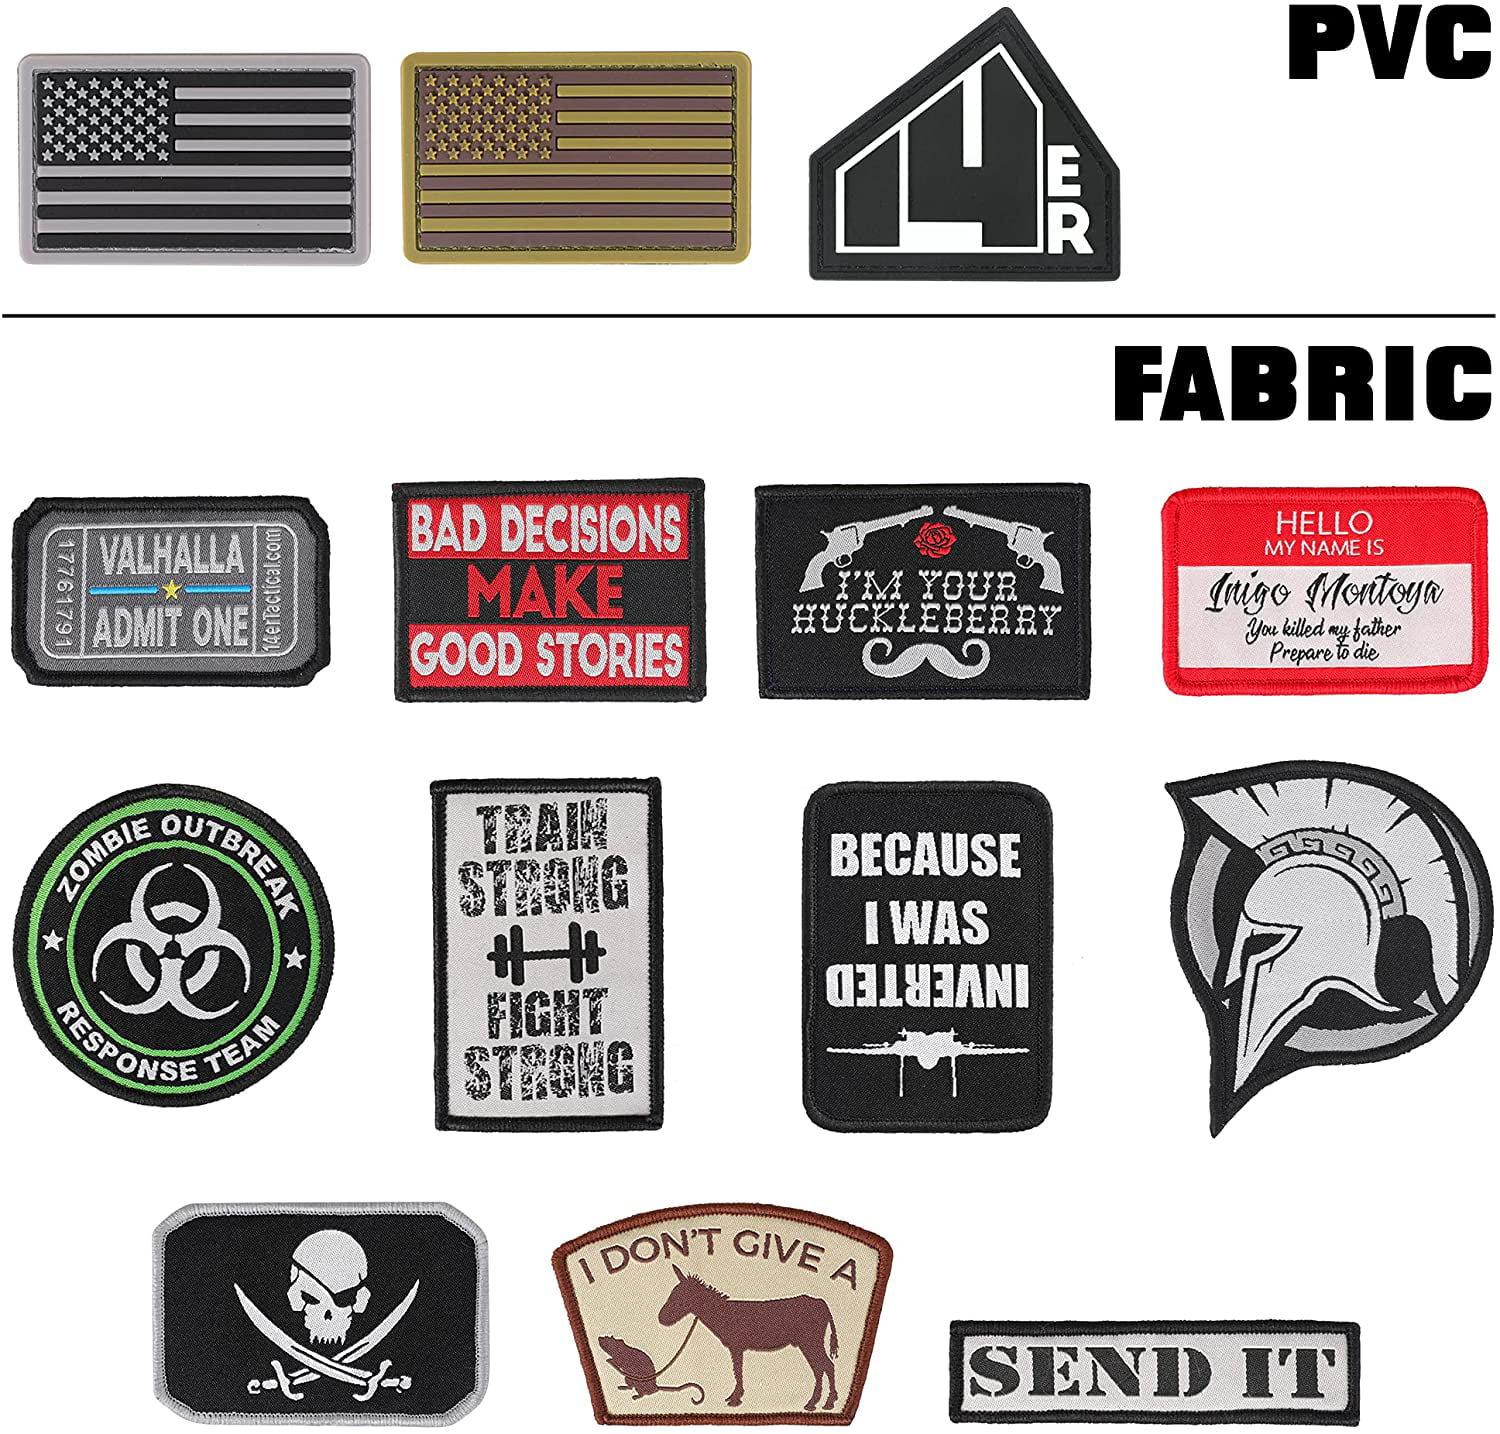 Dearhouse 14er Tactical Morale Patches (14-Pack) | Hook & Loop Backed, 3 x  2 PVC Flags & Funny Patches | Perfect for Hat, Backpack, Jacket, Military